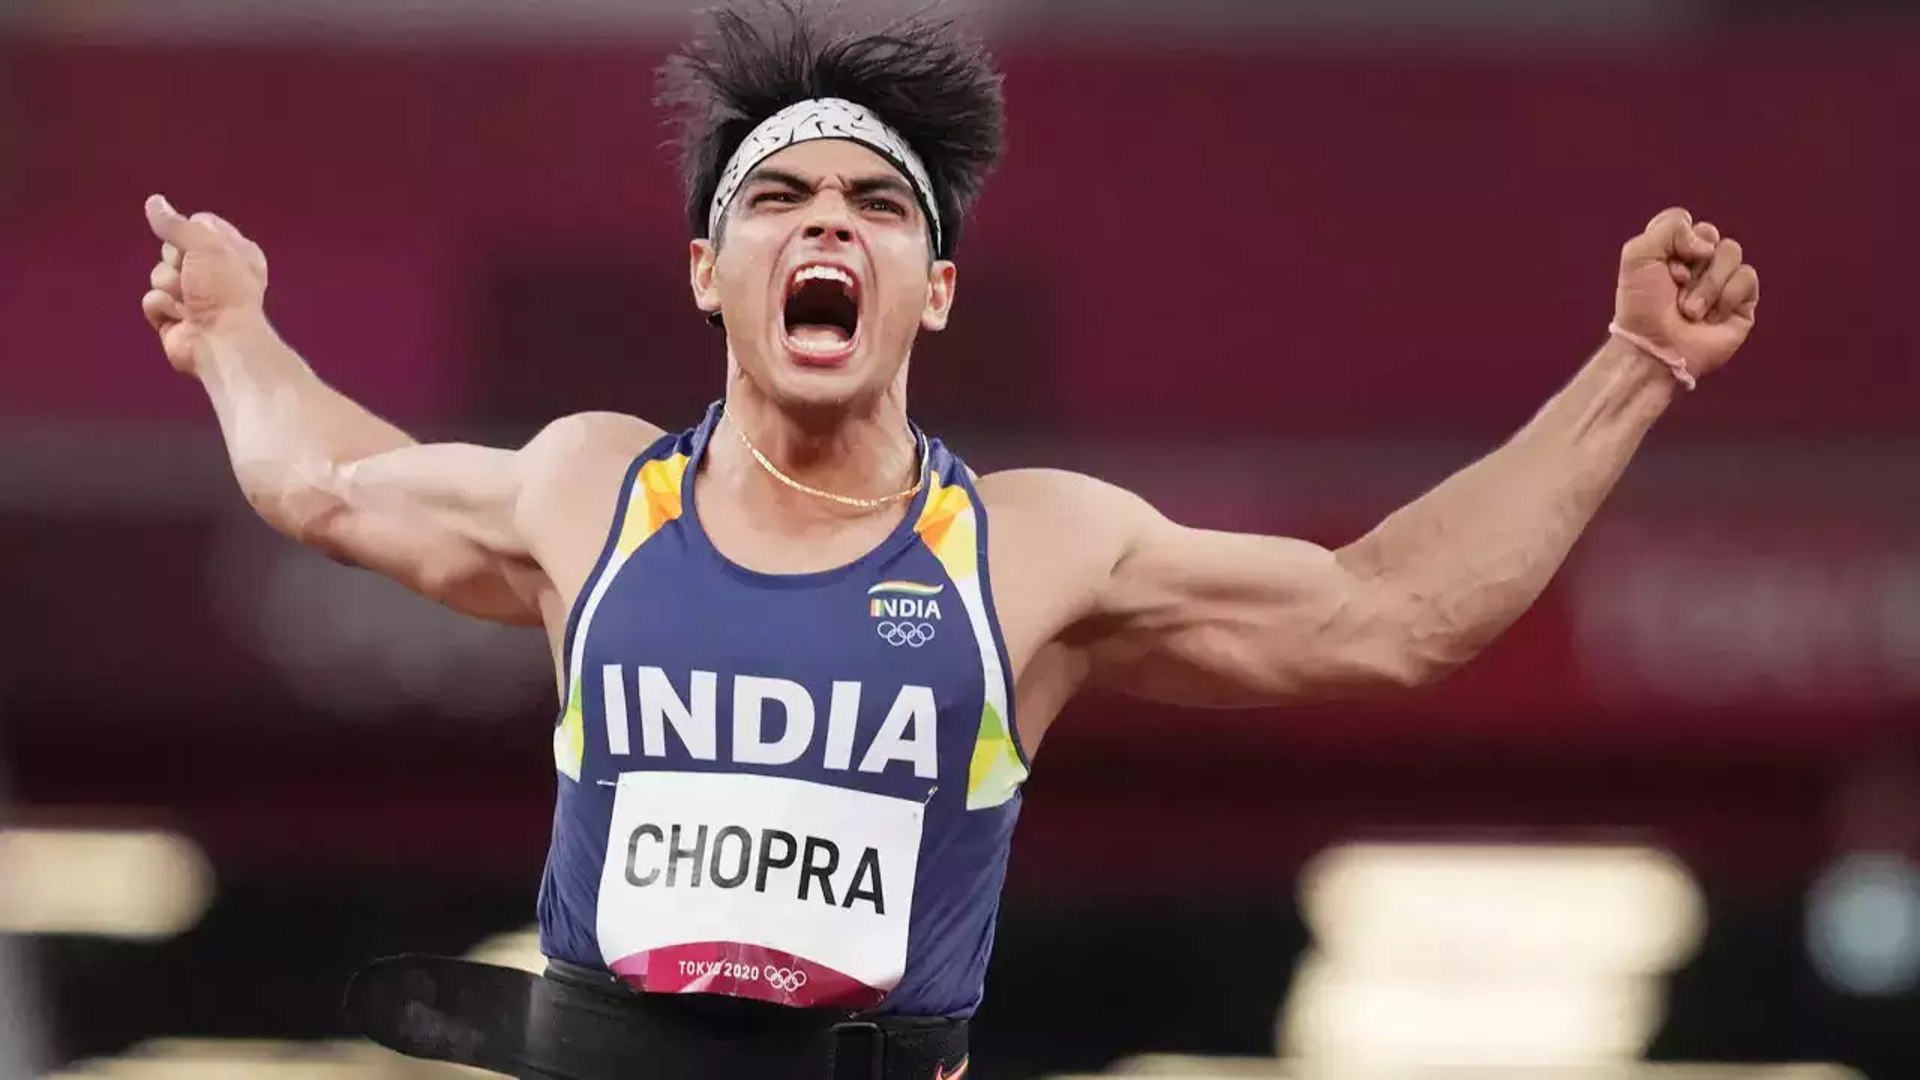 Neeraj Chopra after a massive throw in the finals of Tokyo 2020 (Image Credits: Olympics.com)